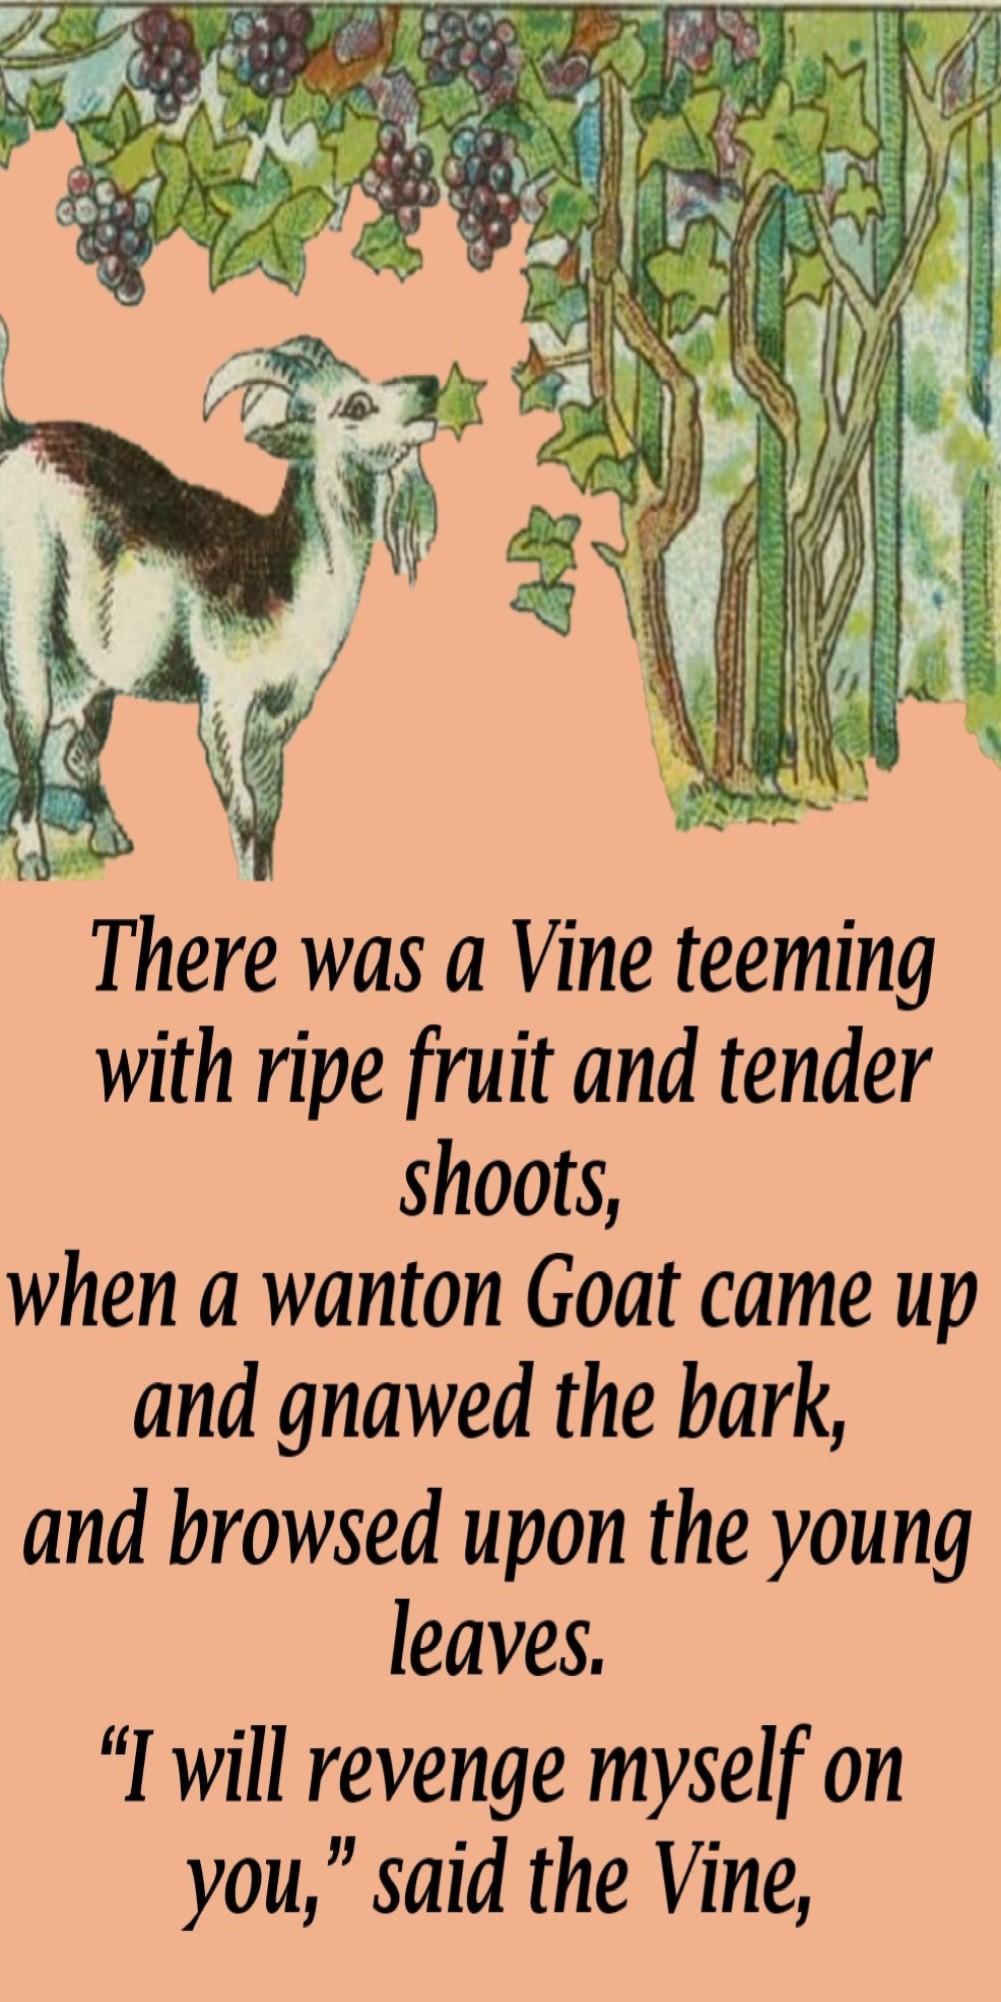 1The Vine And The Goat -